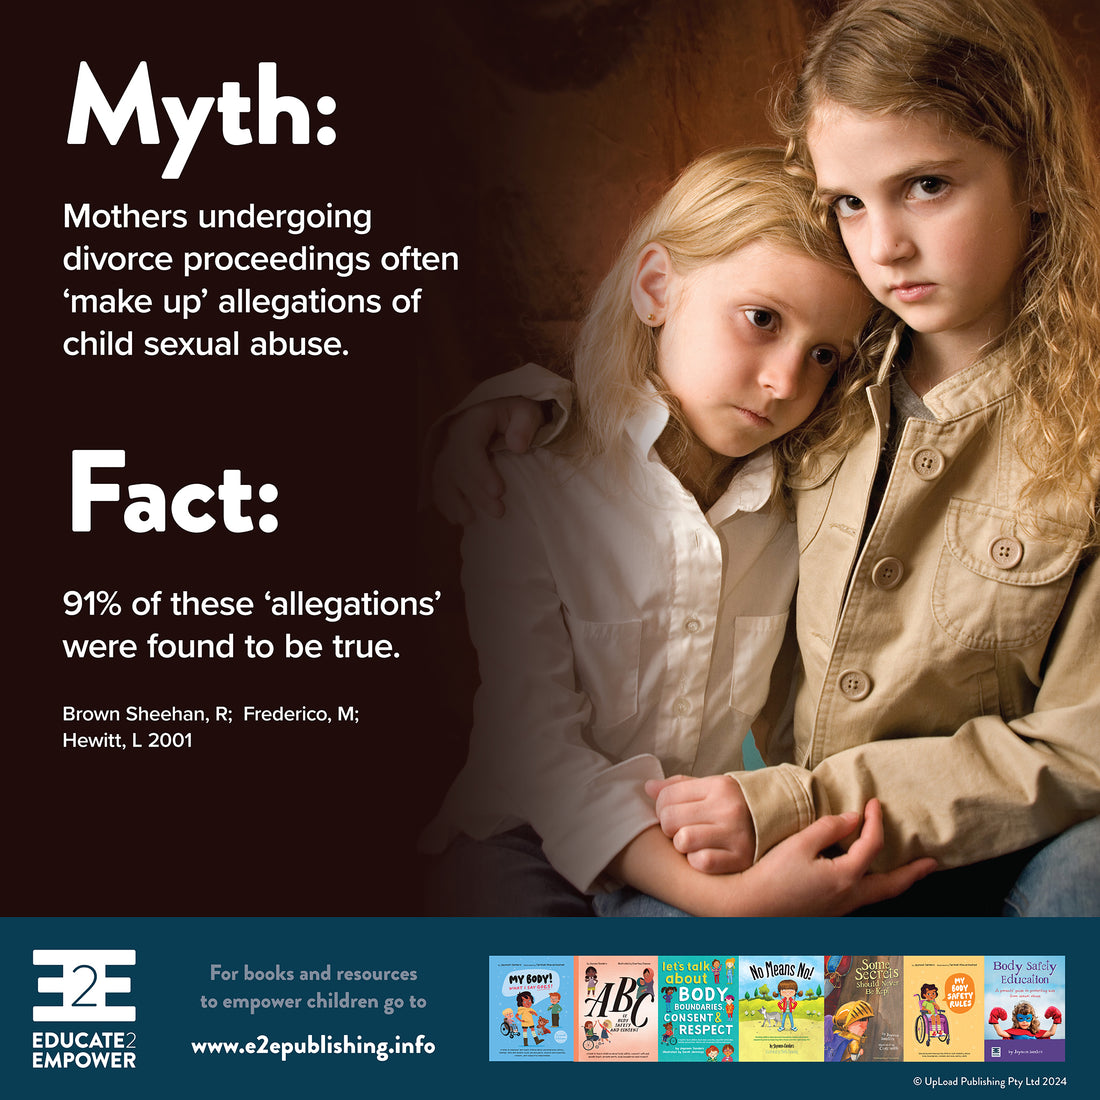 Myth: Mothers undergoing divorce proceedings often 'make up' allegations of child sexual abuse.